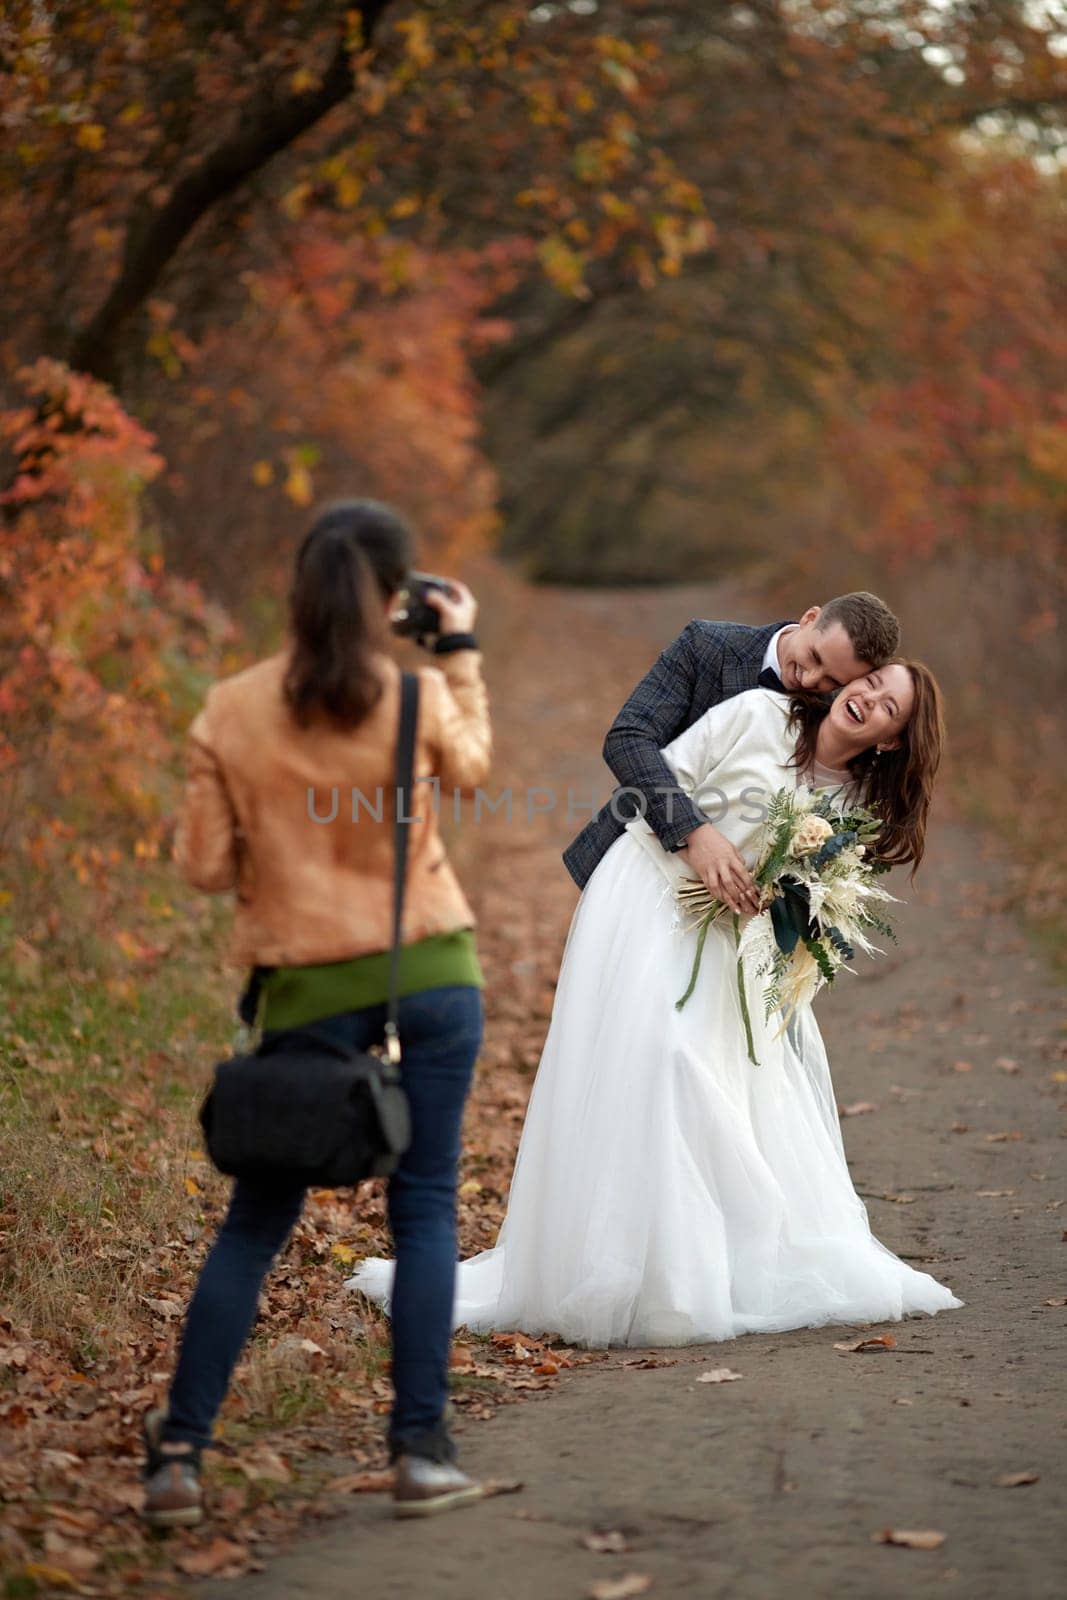 female wedding photographer taking pictures of the bride and groom in autumn